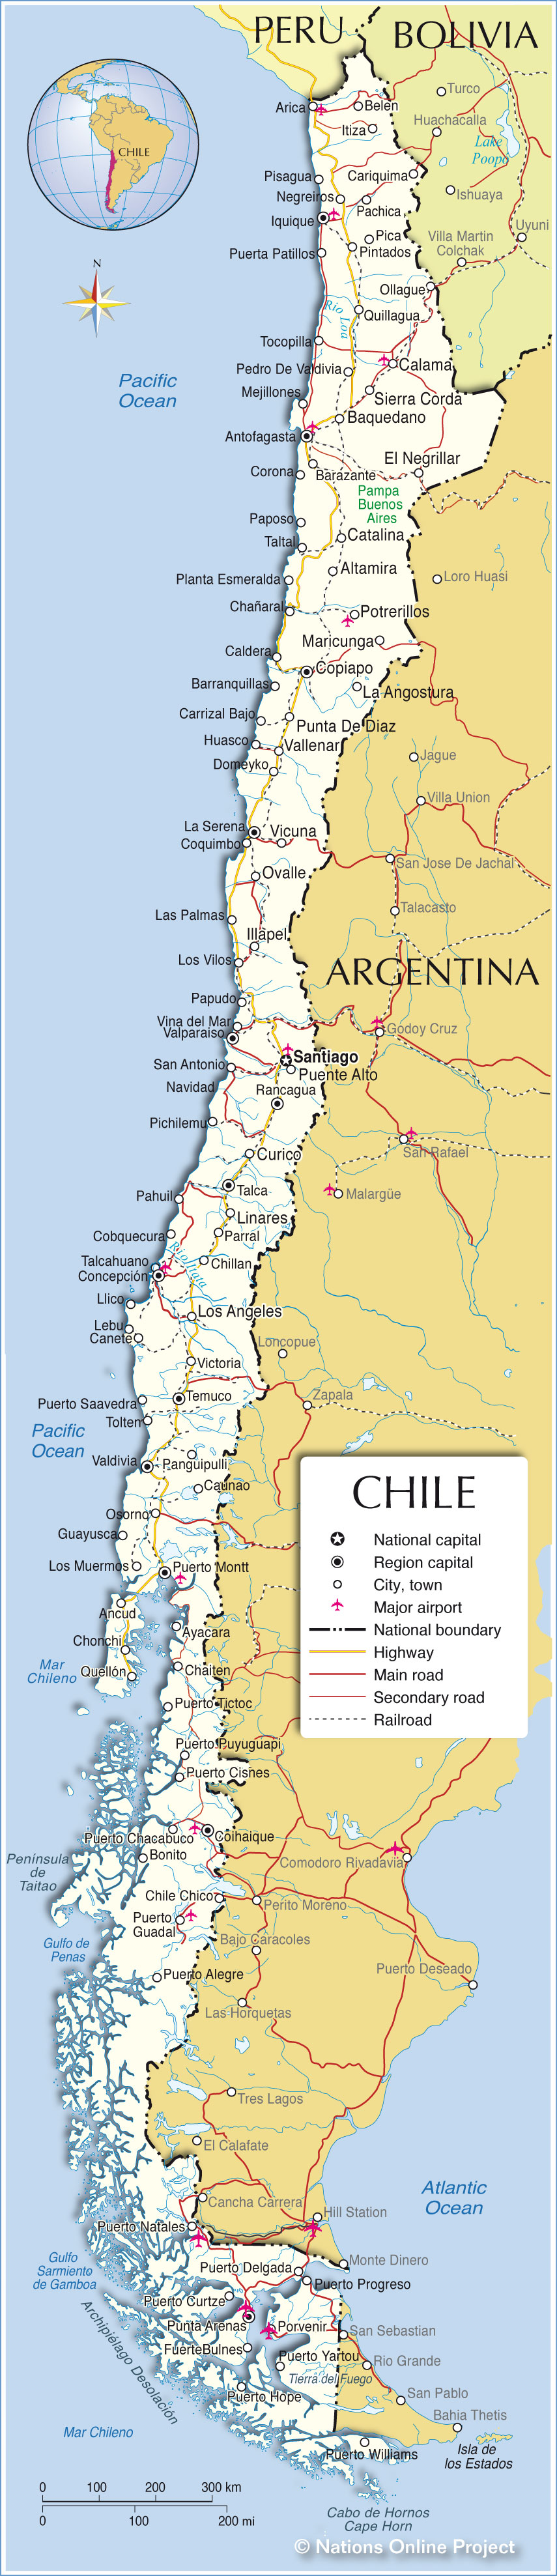 Political Map of Chile